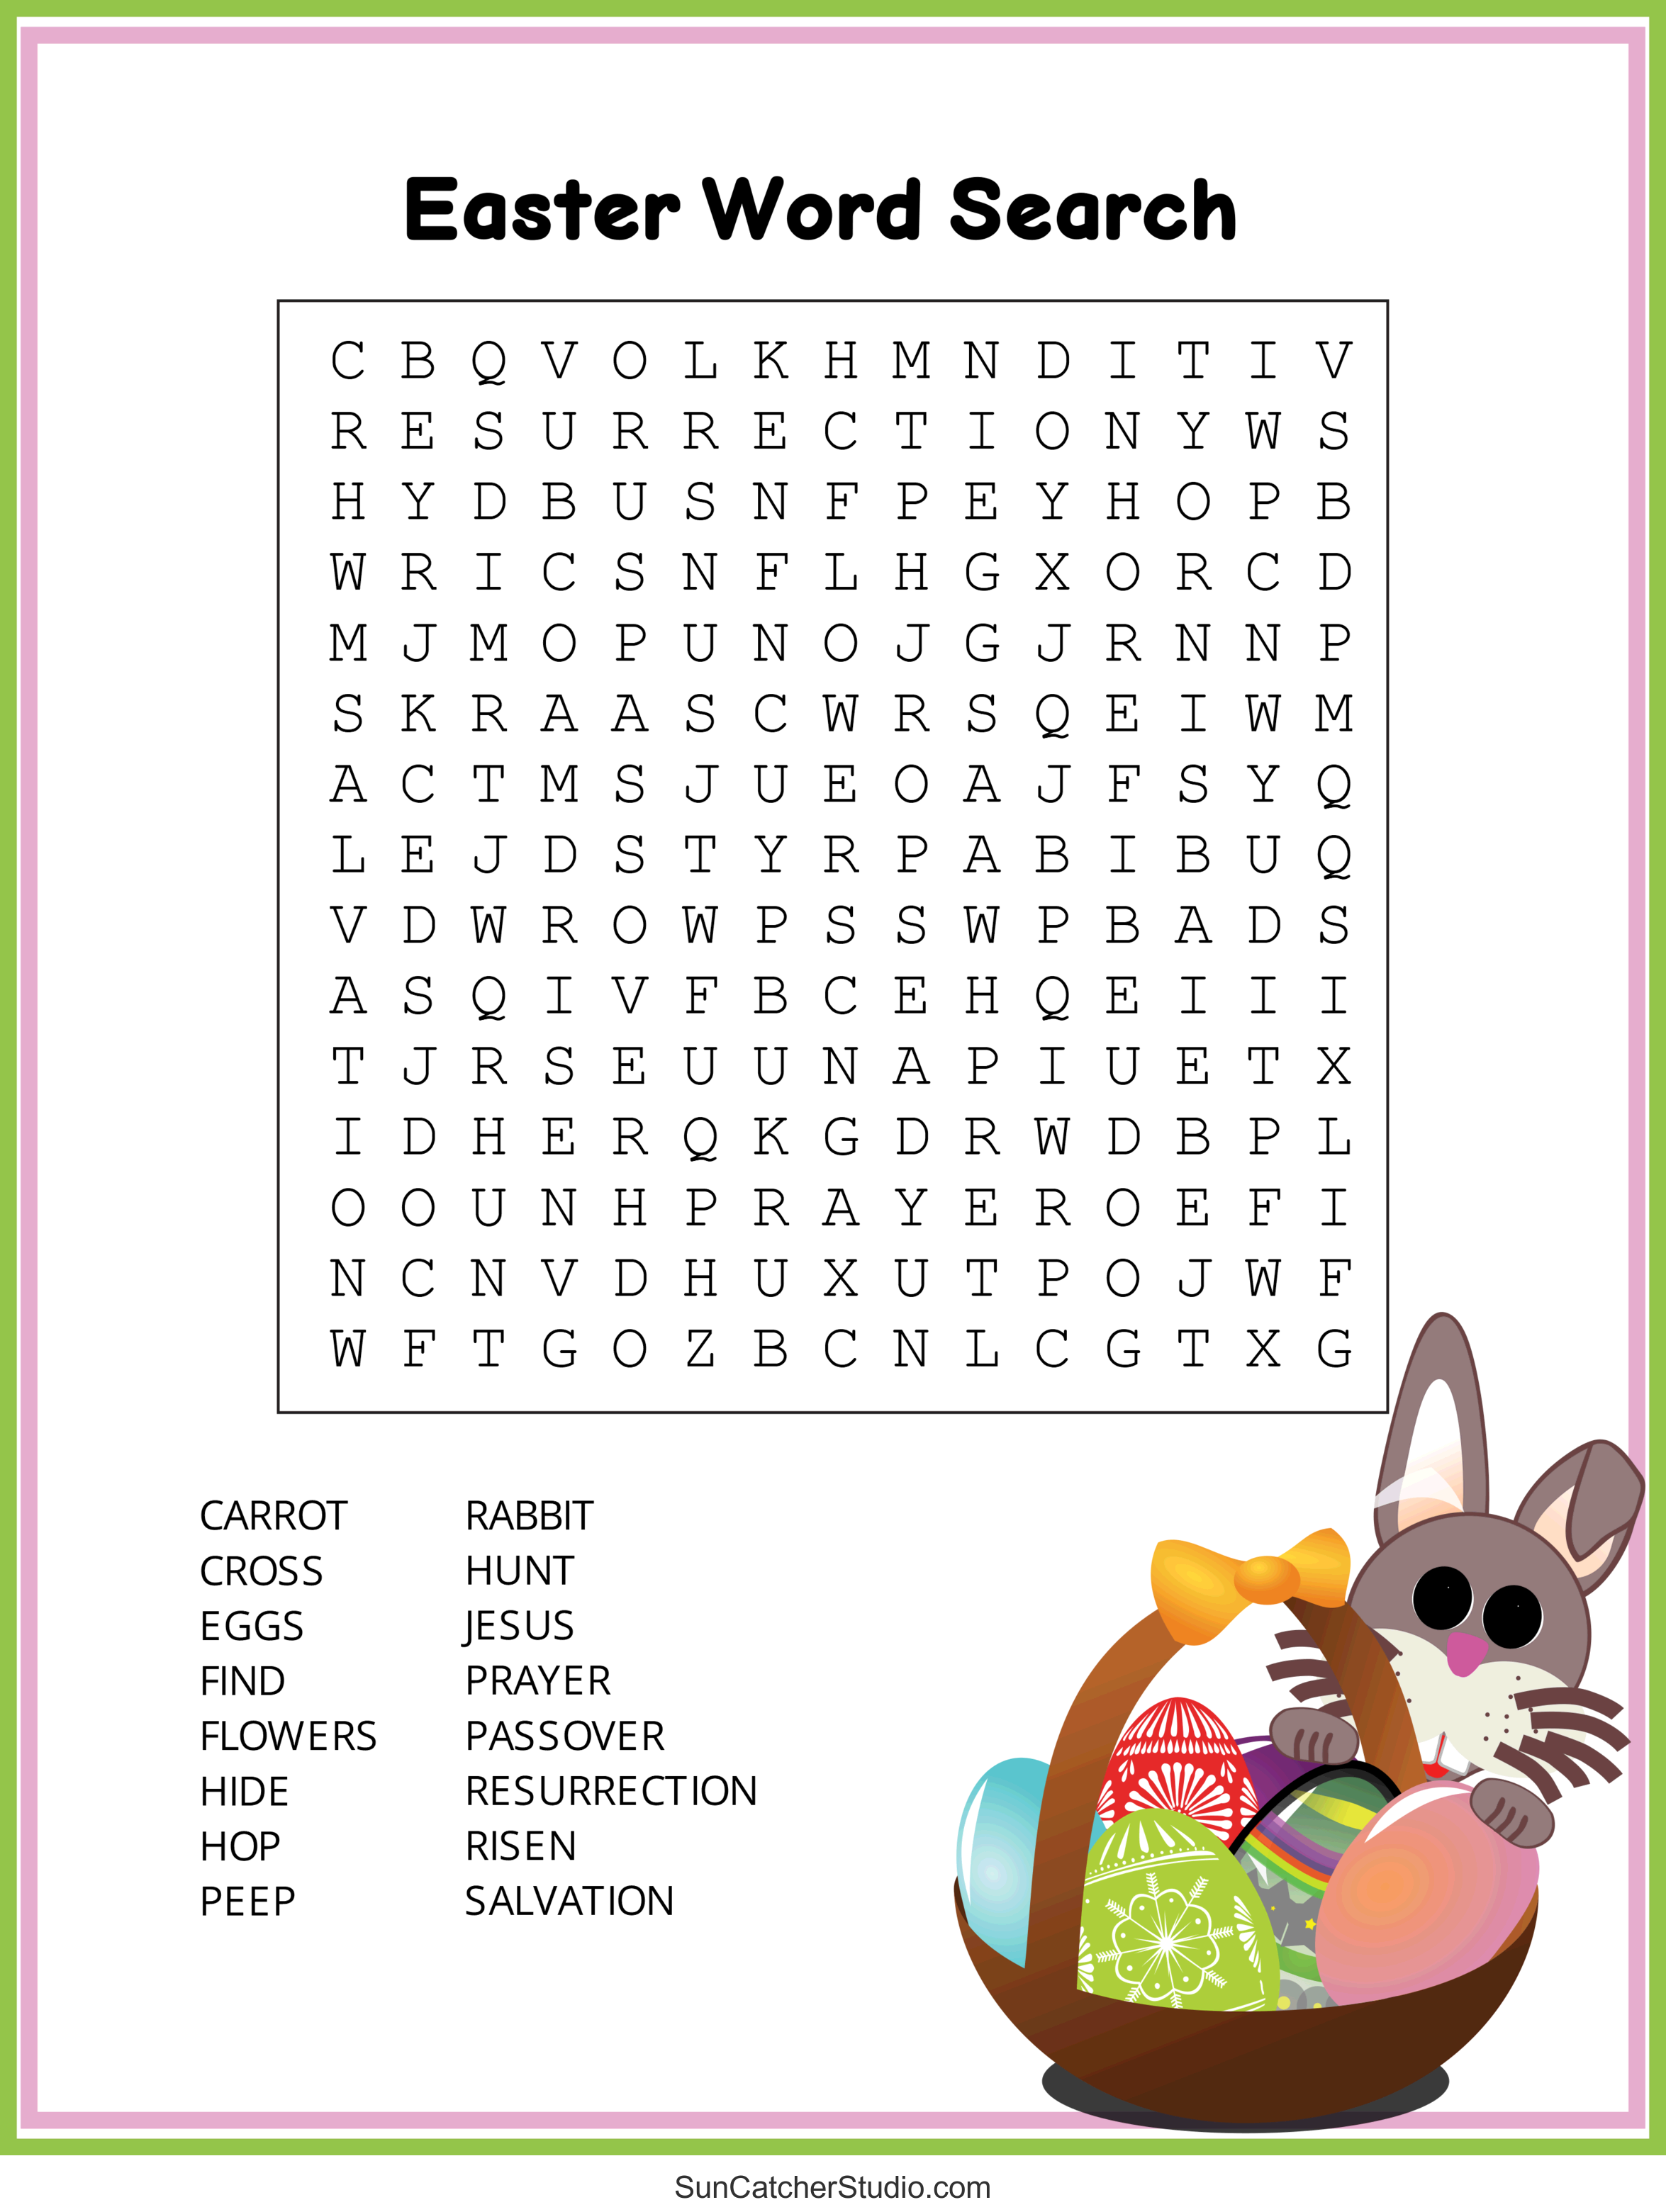 resurrection-word-search